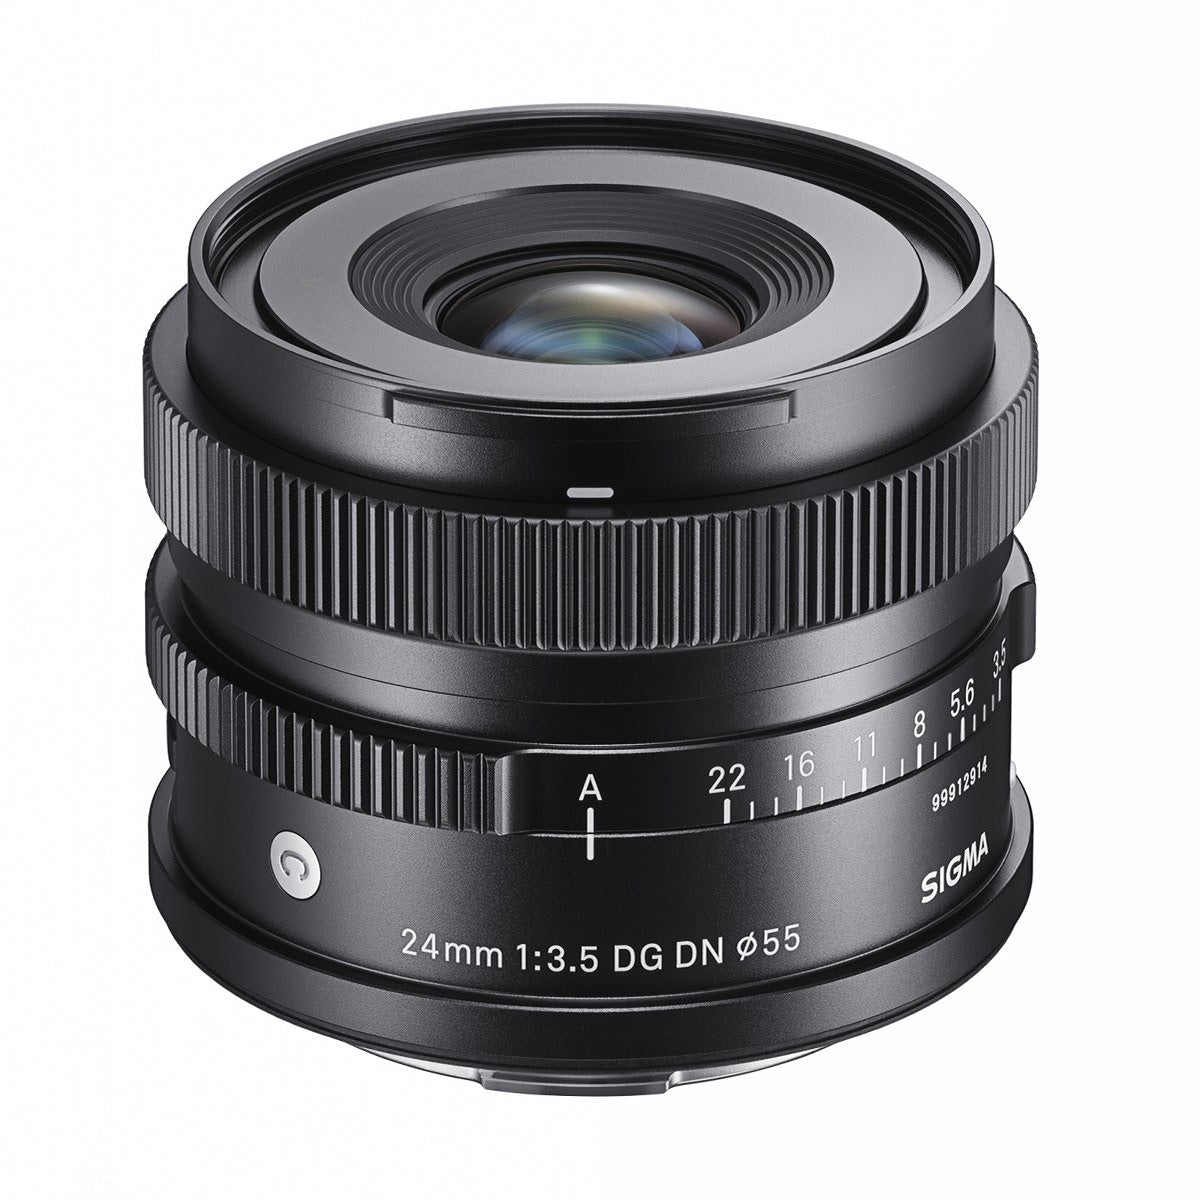 Sigma 24mm f/3.5 DG DN Contemporary Lens for Sony FE